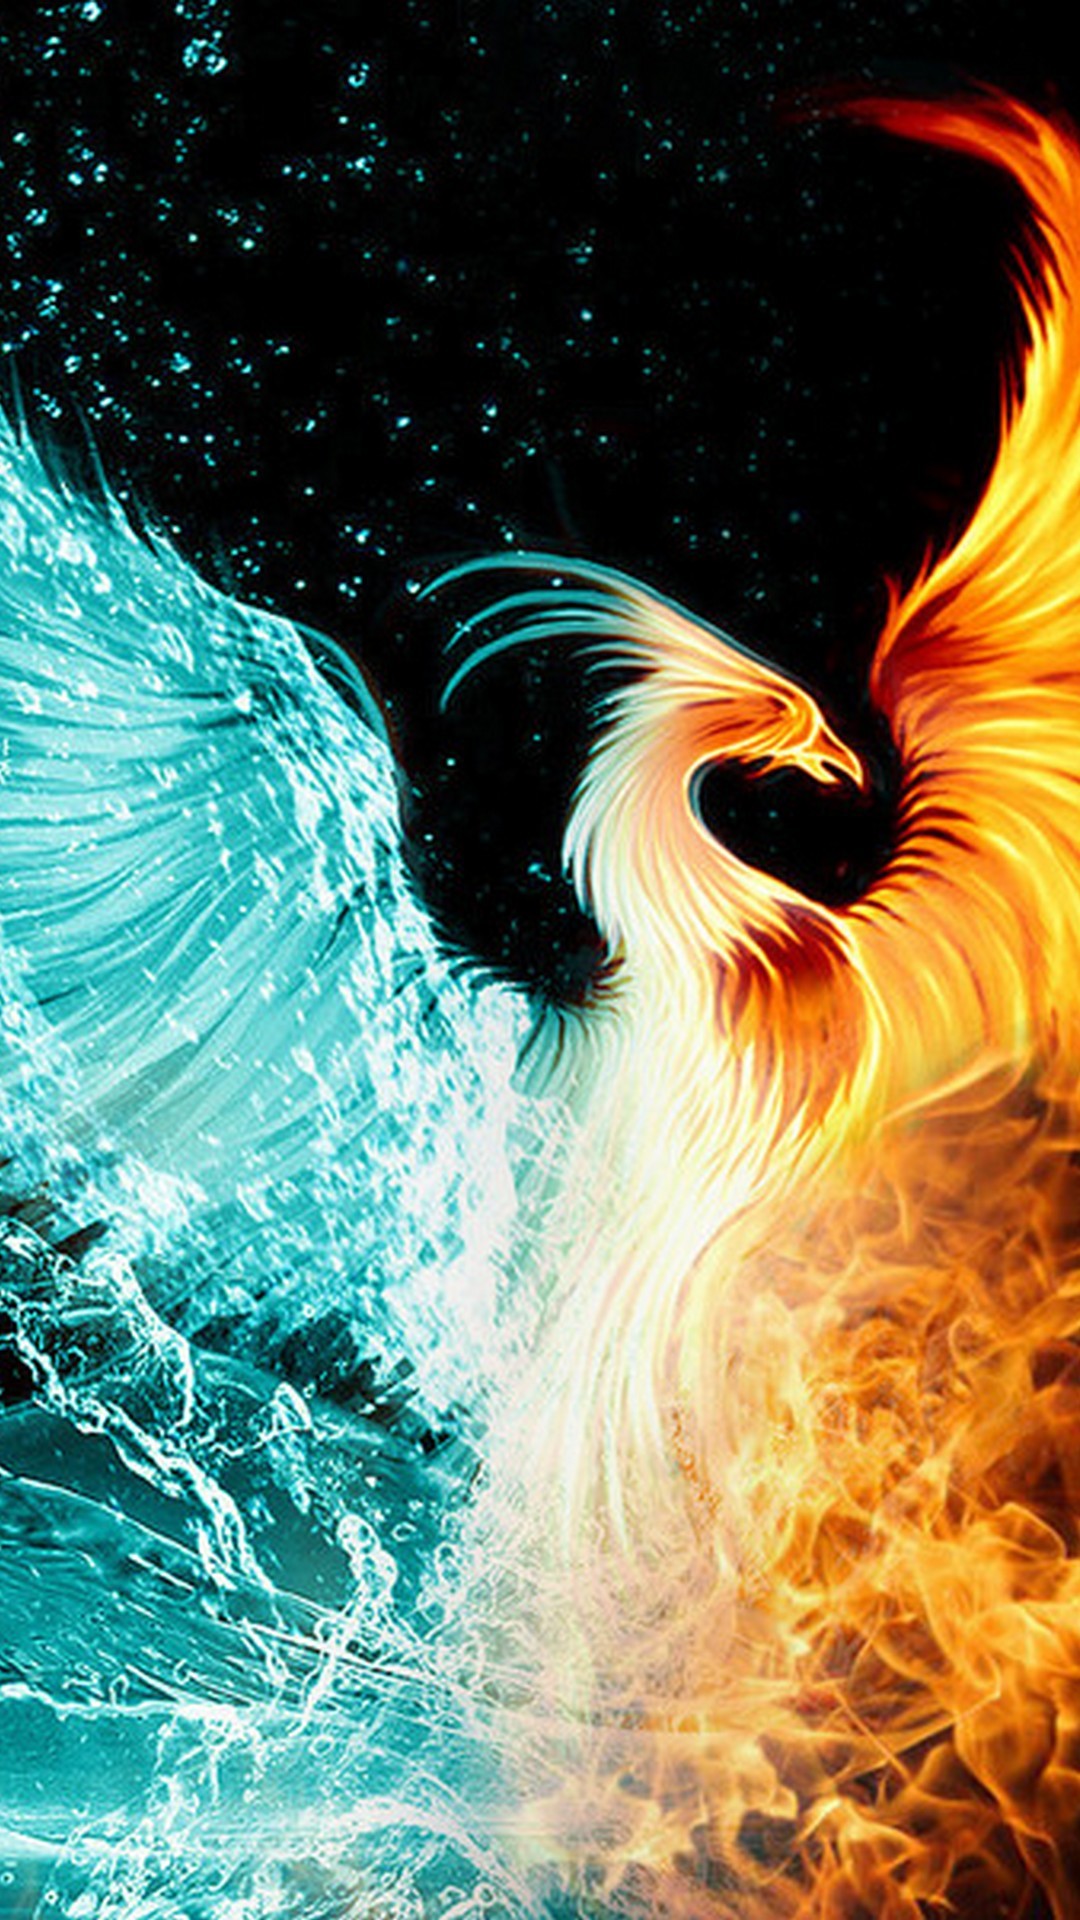 Phoenix Images iPhone Wallpaper with resolution 1080X1920 pixel. You can make this wallpaper for your iPhone 5, 6, 7, 8, X backgrounds, Mobile Screensaver, or iPad Lock Screen